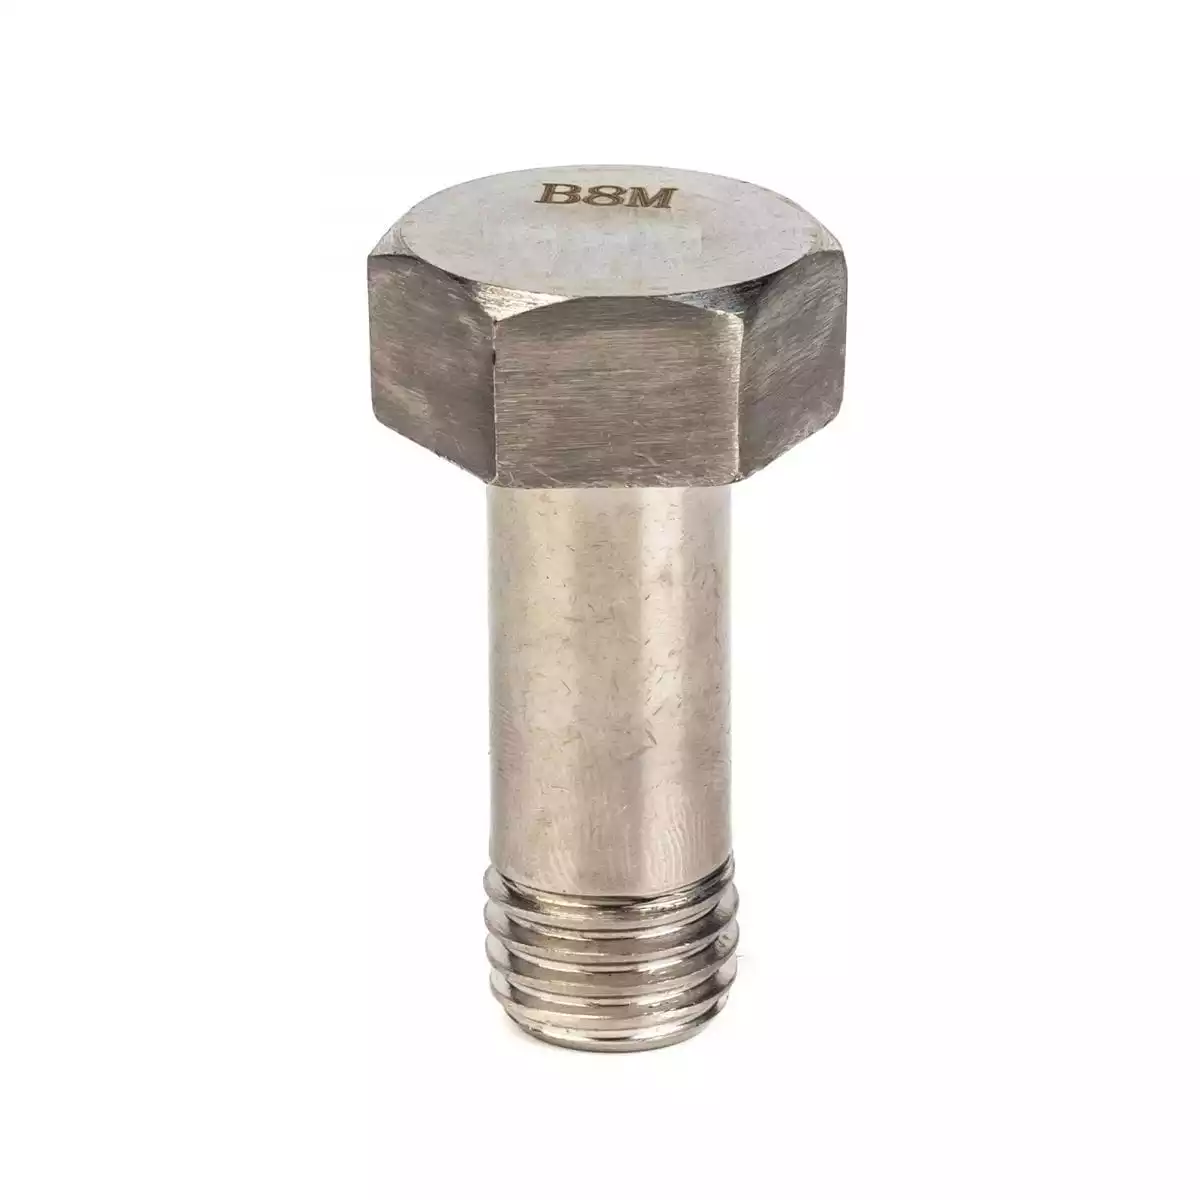 Metric Hex Bolt, Stainless Steel 316, M20, DIN 933